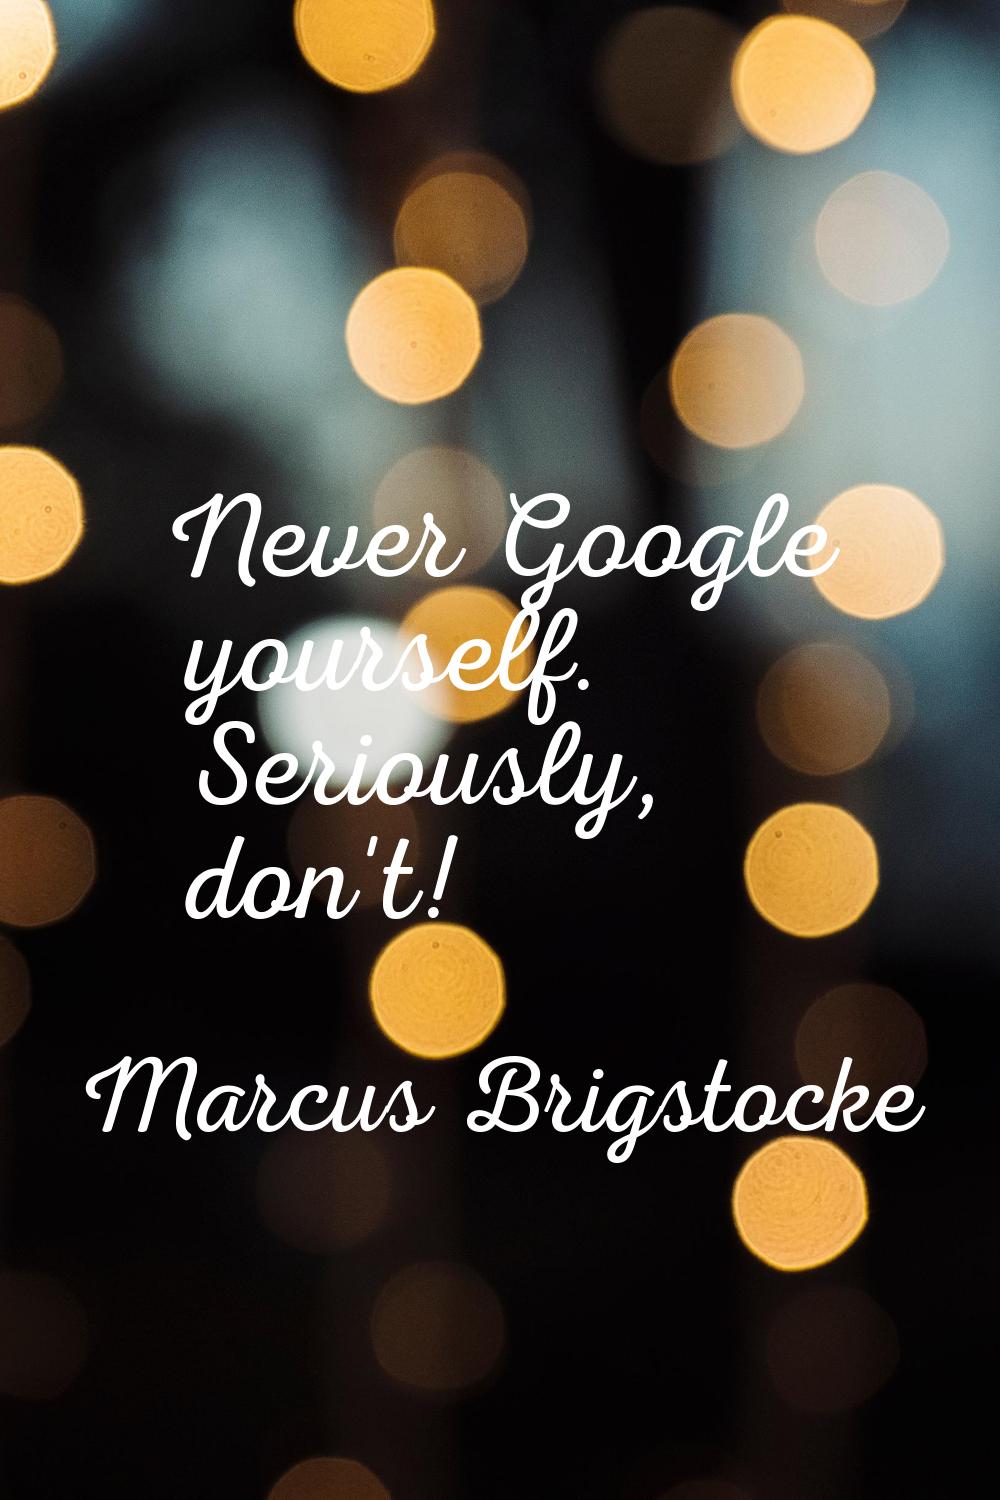 Never Google yourself. Seriously, don't!